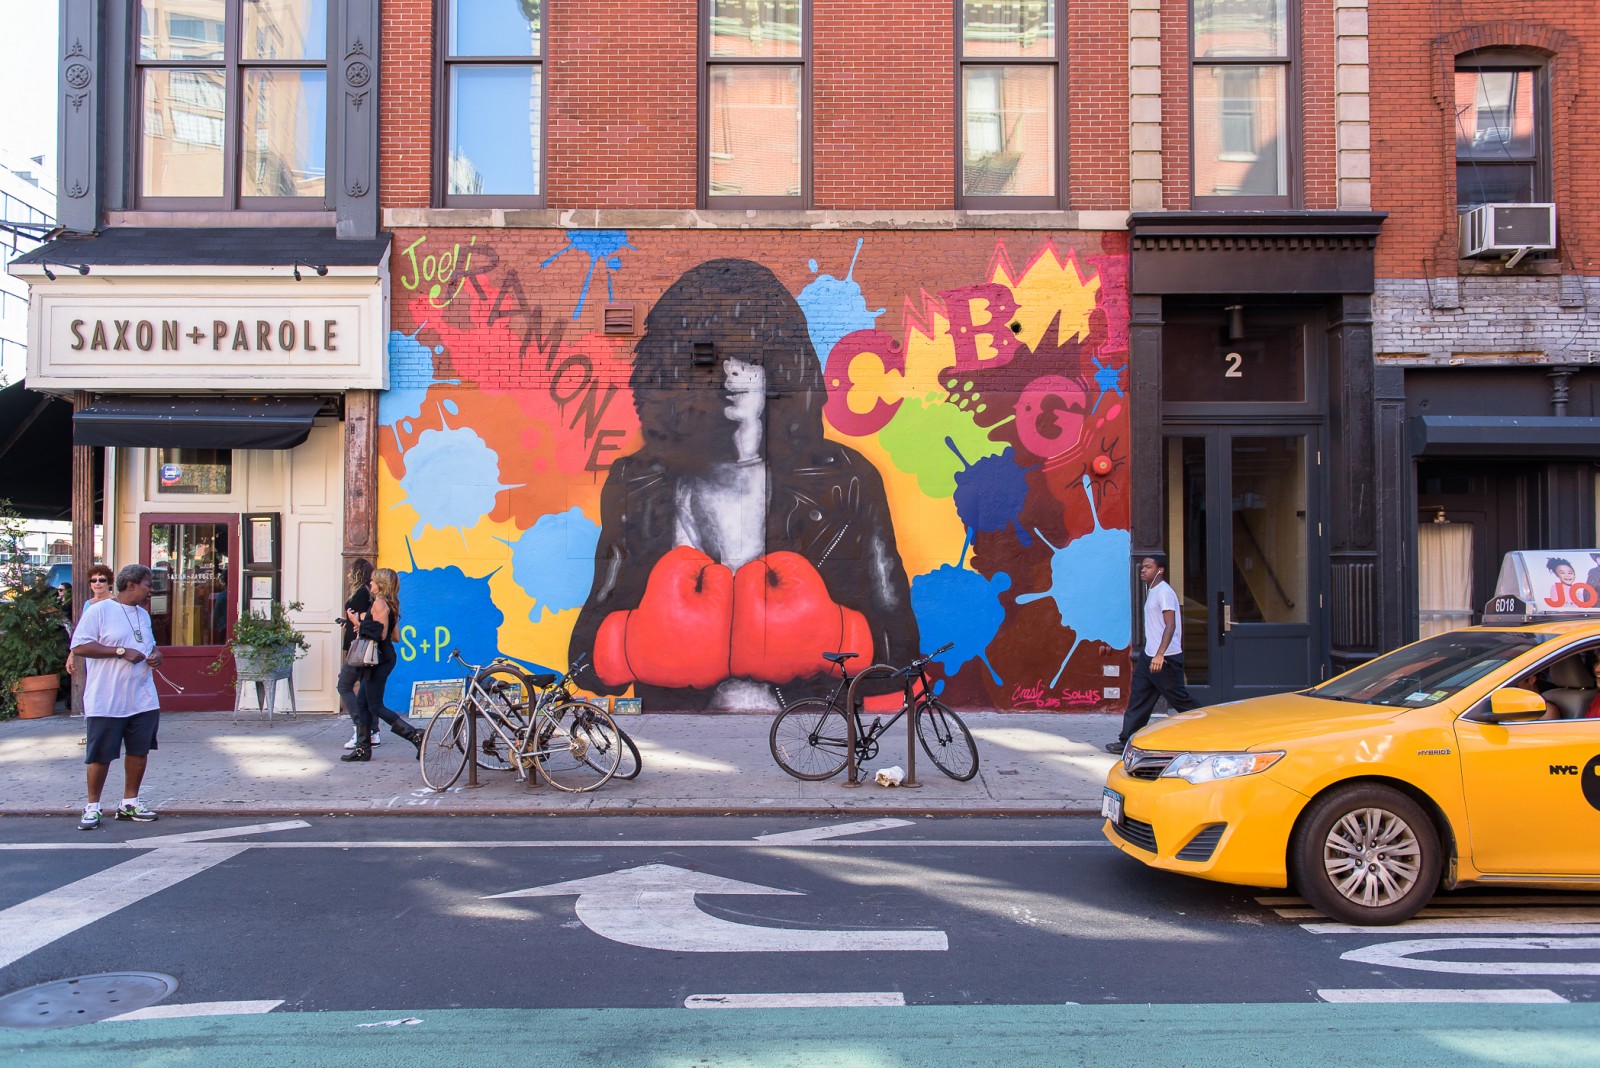 A mural in the East Village